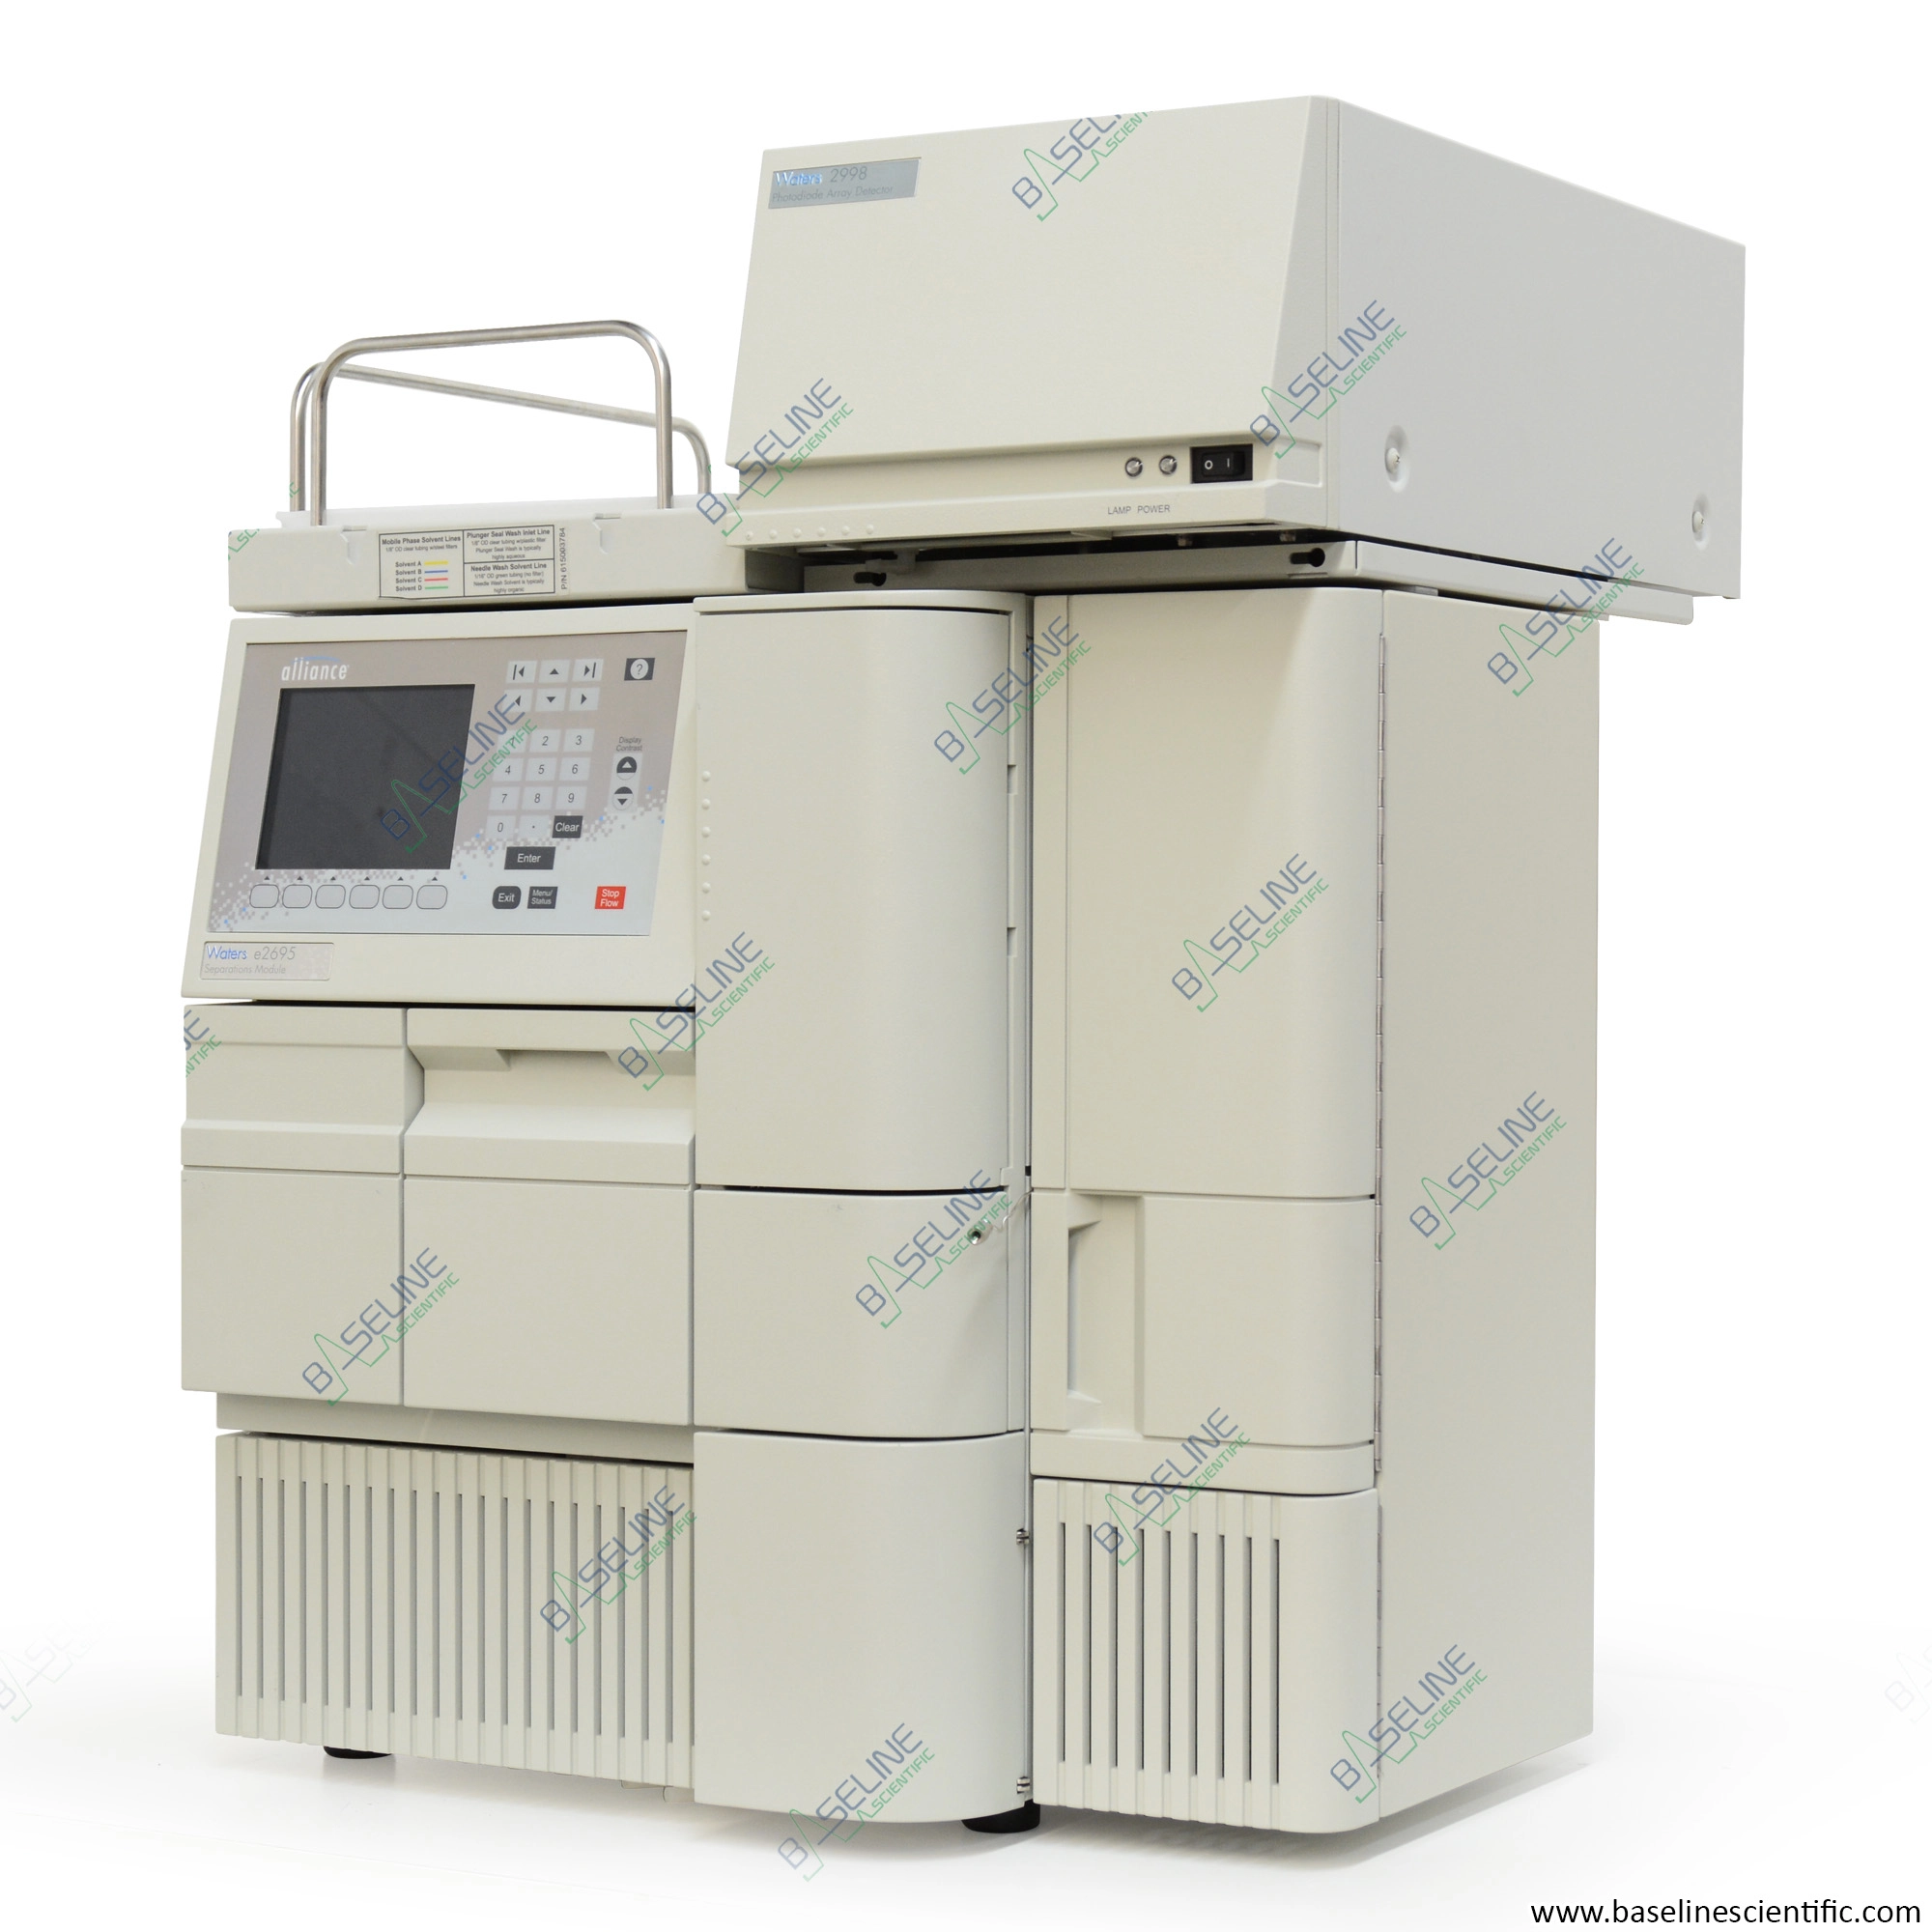 Refurbished Waters Alliance e2695 HPLC and 2998 Photodiode Array Detector